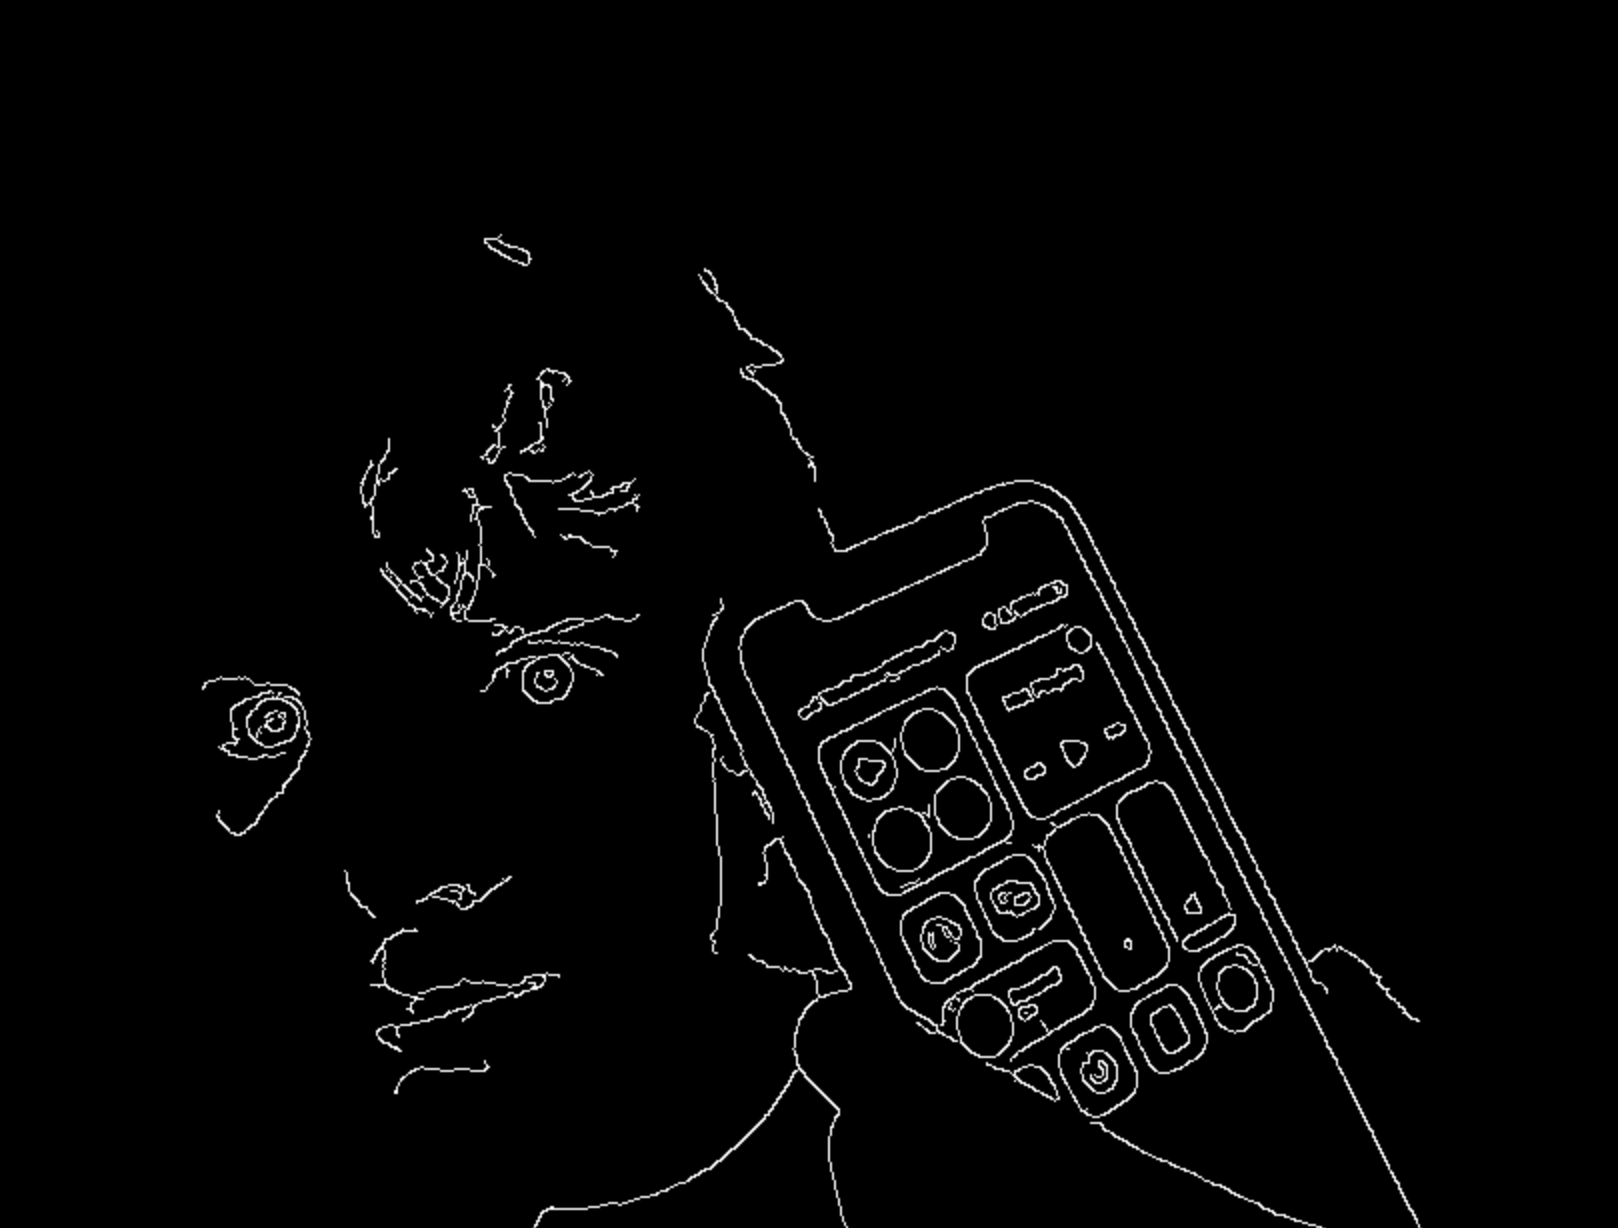 A Canny Edge Detector Image of a man holding a phone